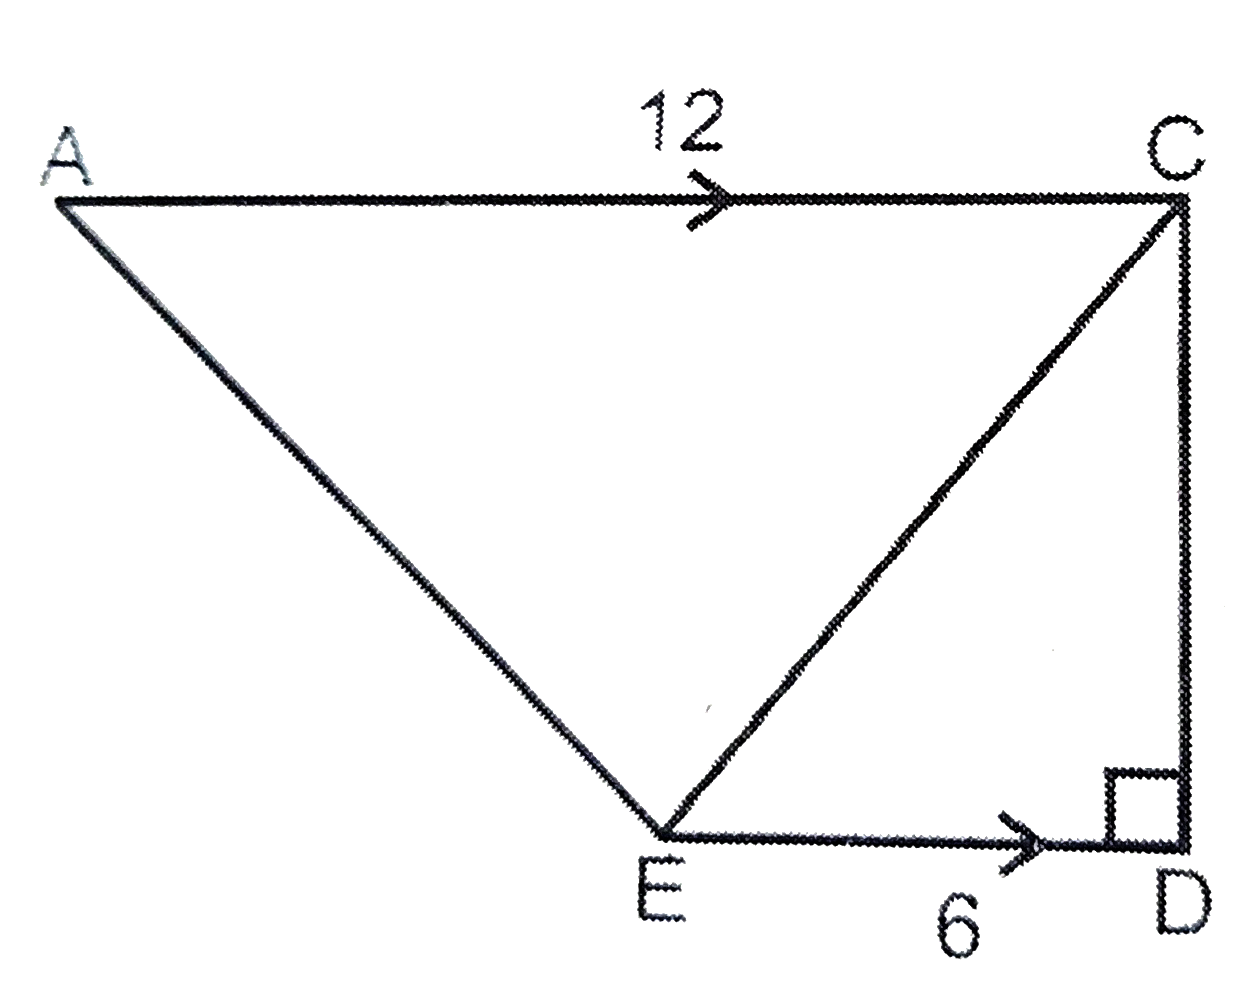 In the figure shown, area of triangle ACE is 48. If  AC is parallel to DE, what is the length CE?